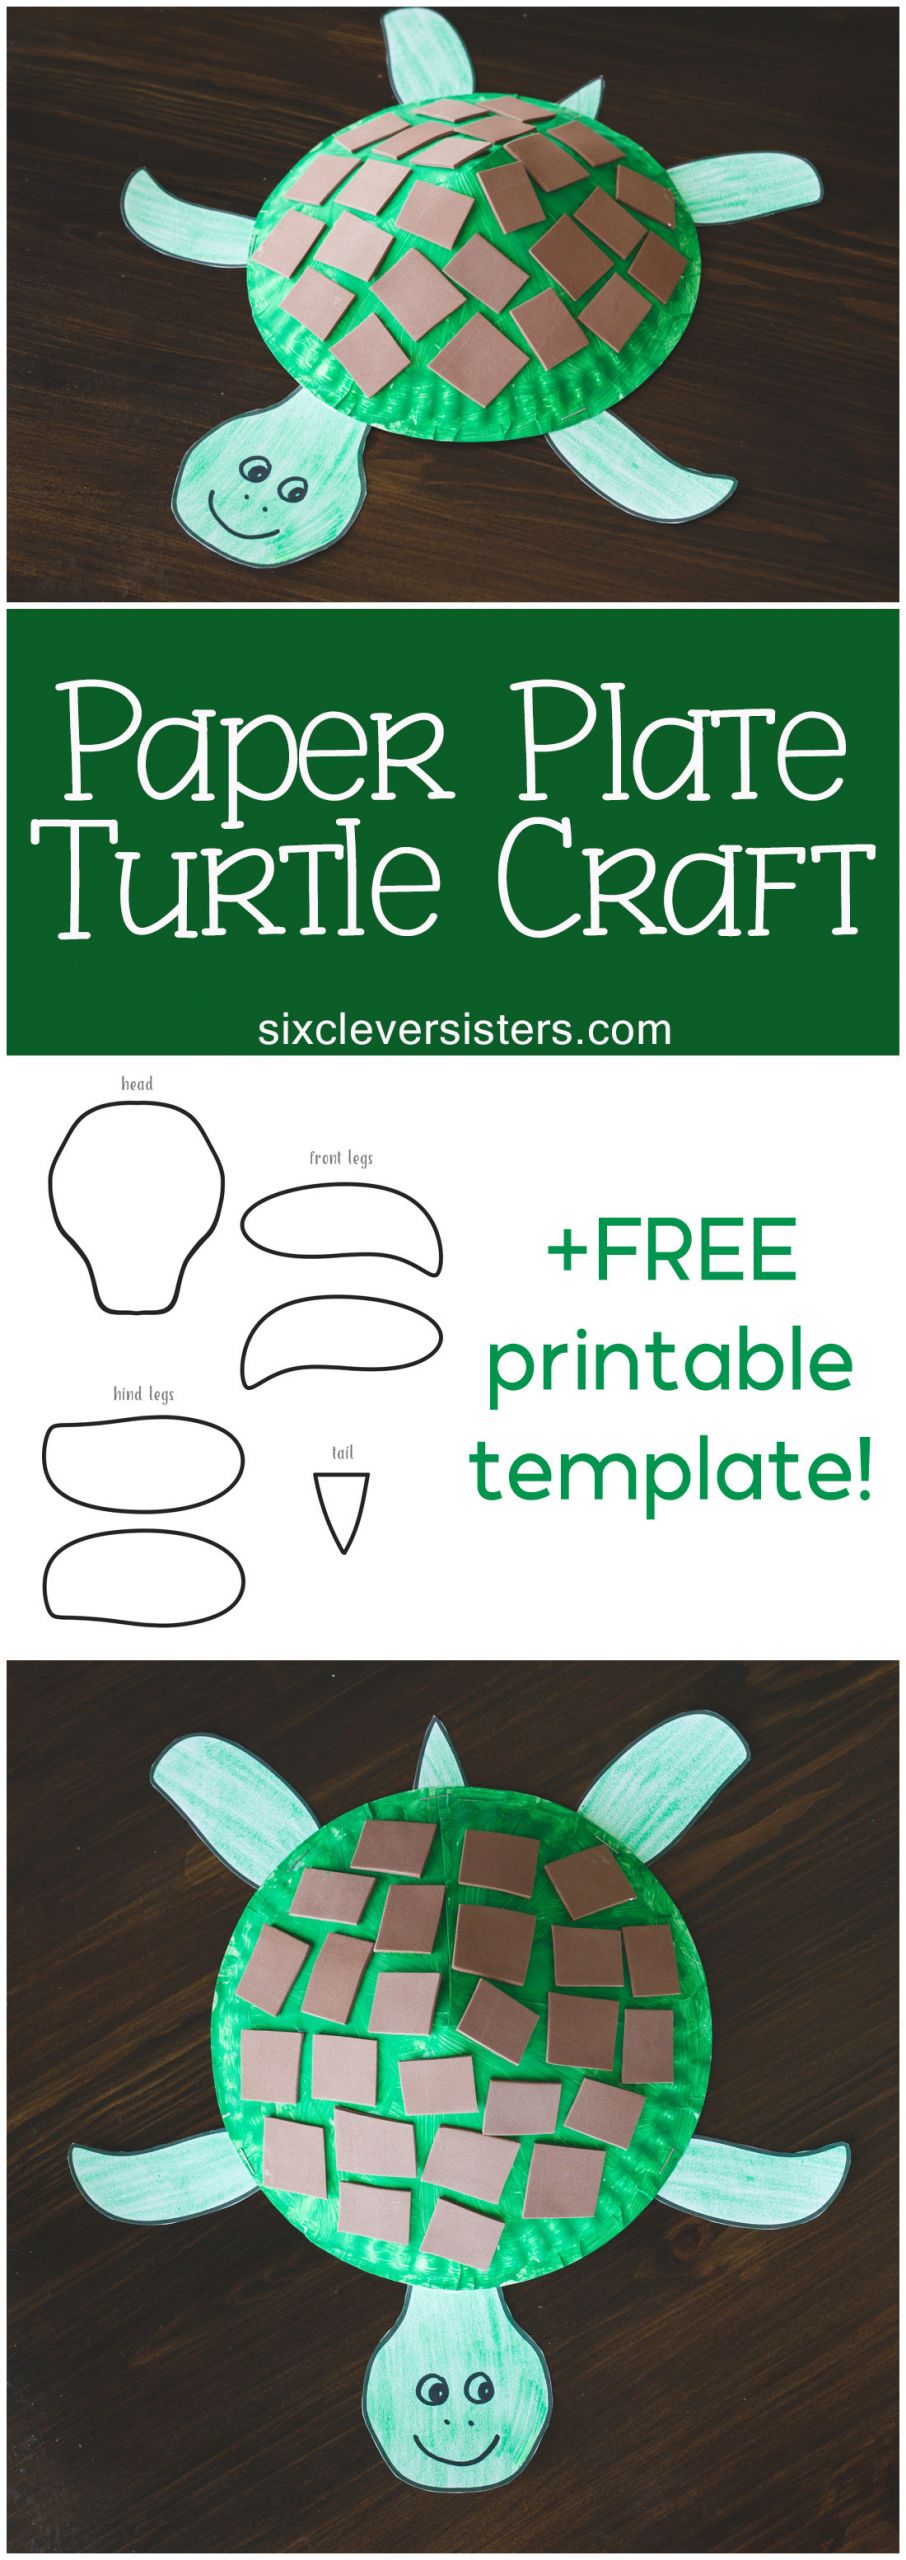 Printable Craft For Kids
 Paper Plate Turtle Craft for Kids Free Printable